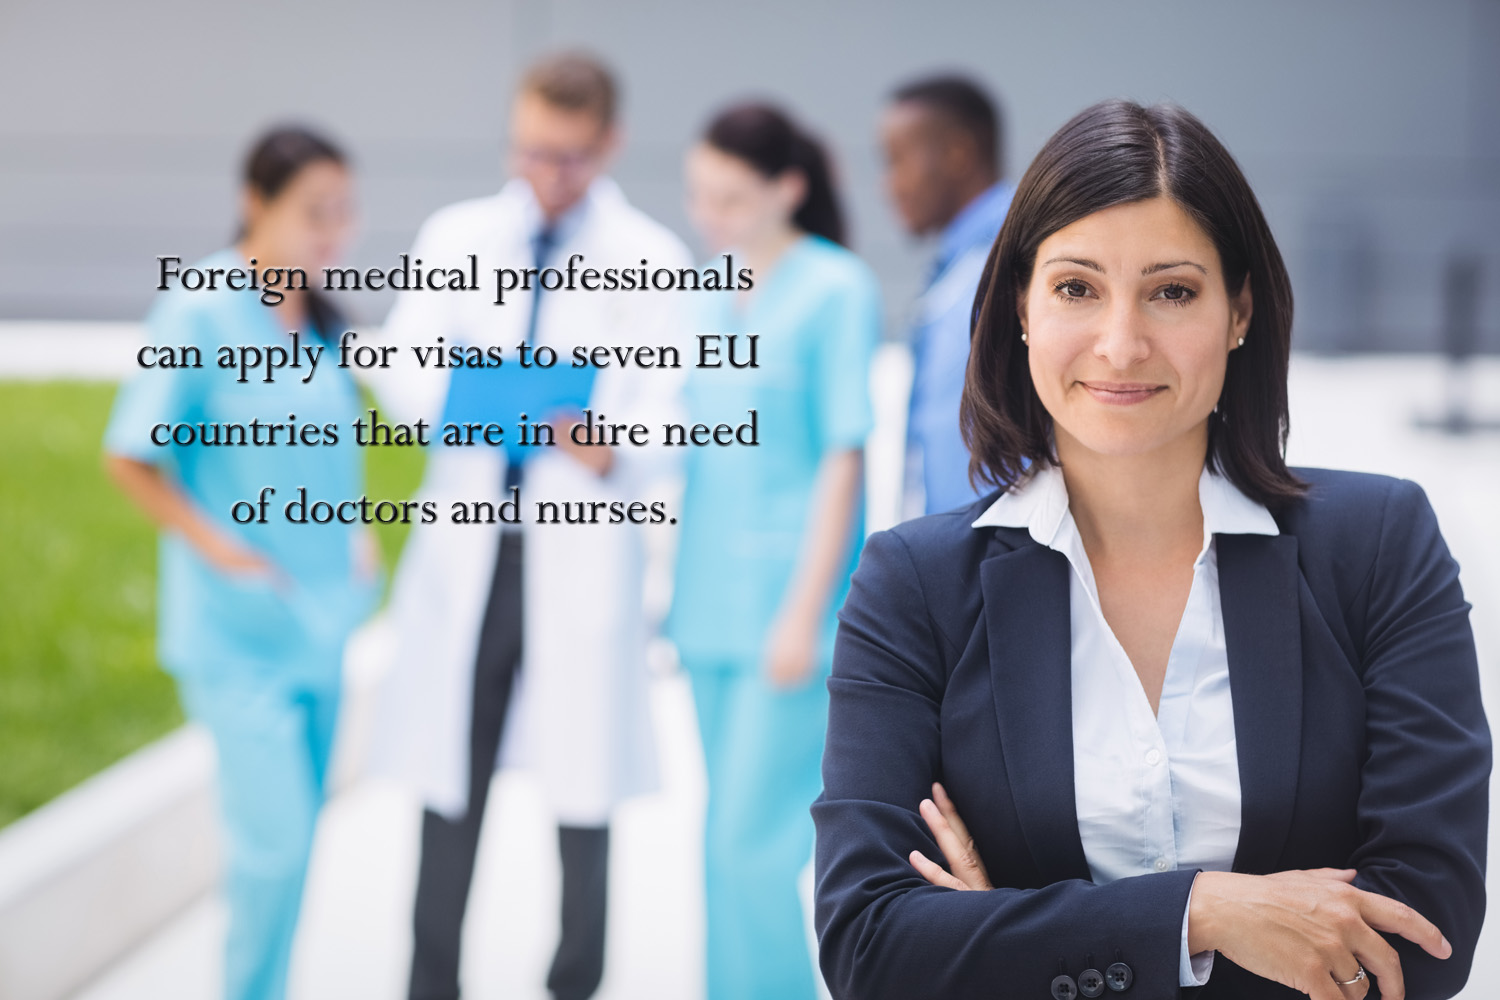 Foreign medical professionals can apply for visas to seven EU countries that are in dire need of doctors and nurses.